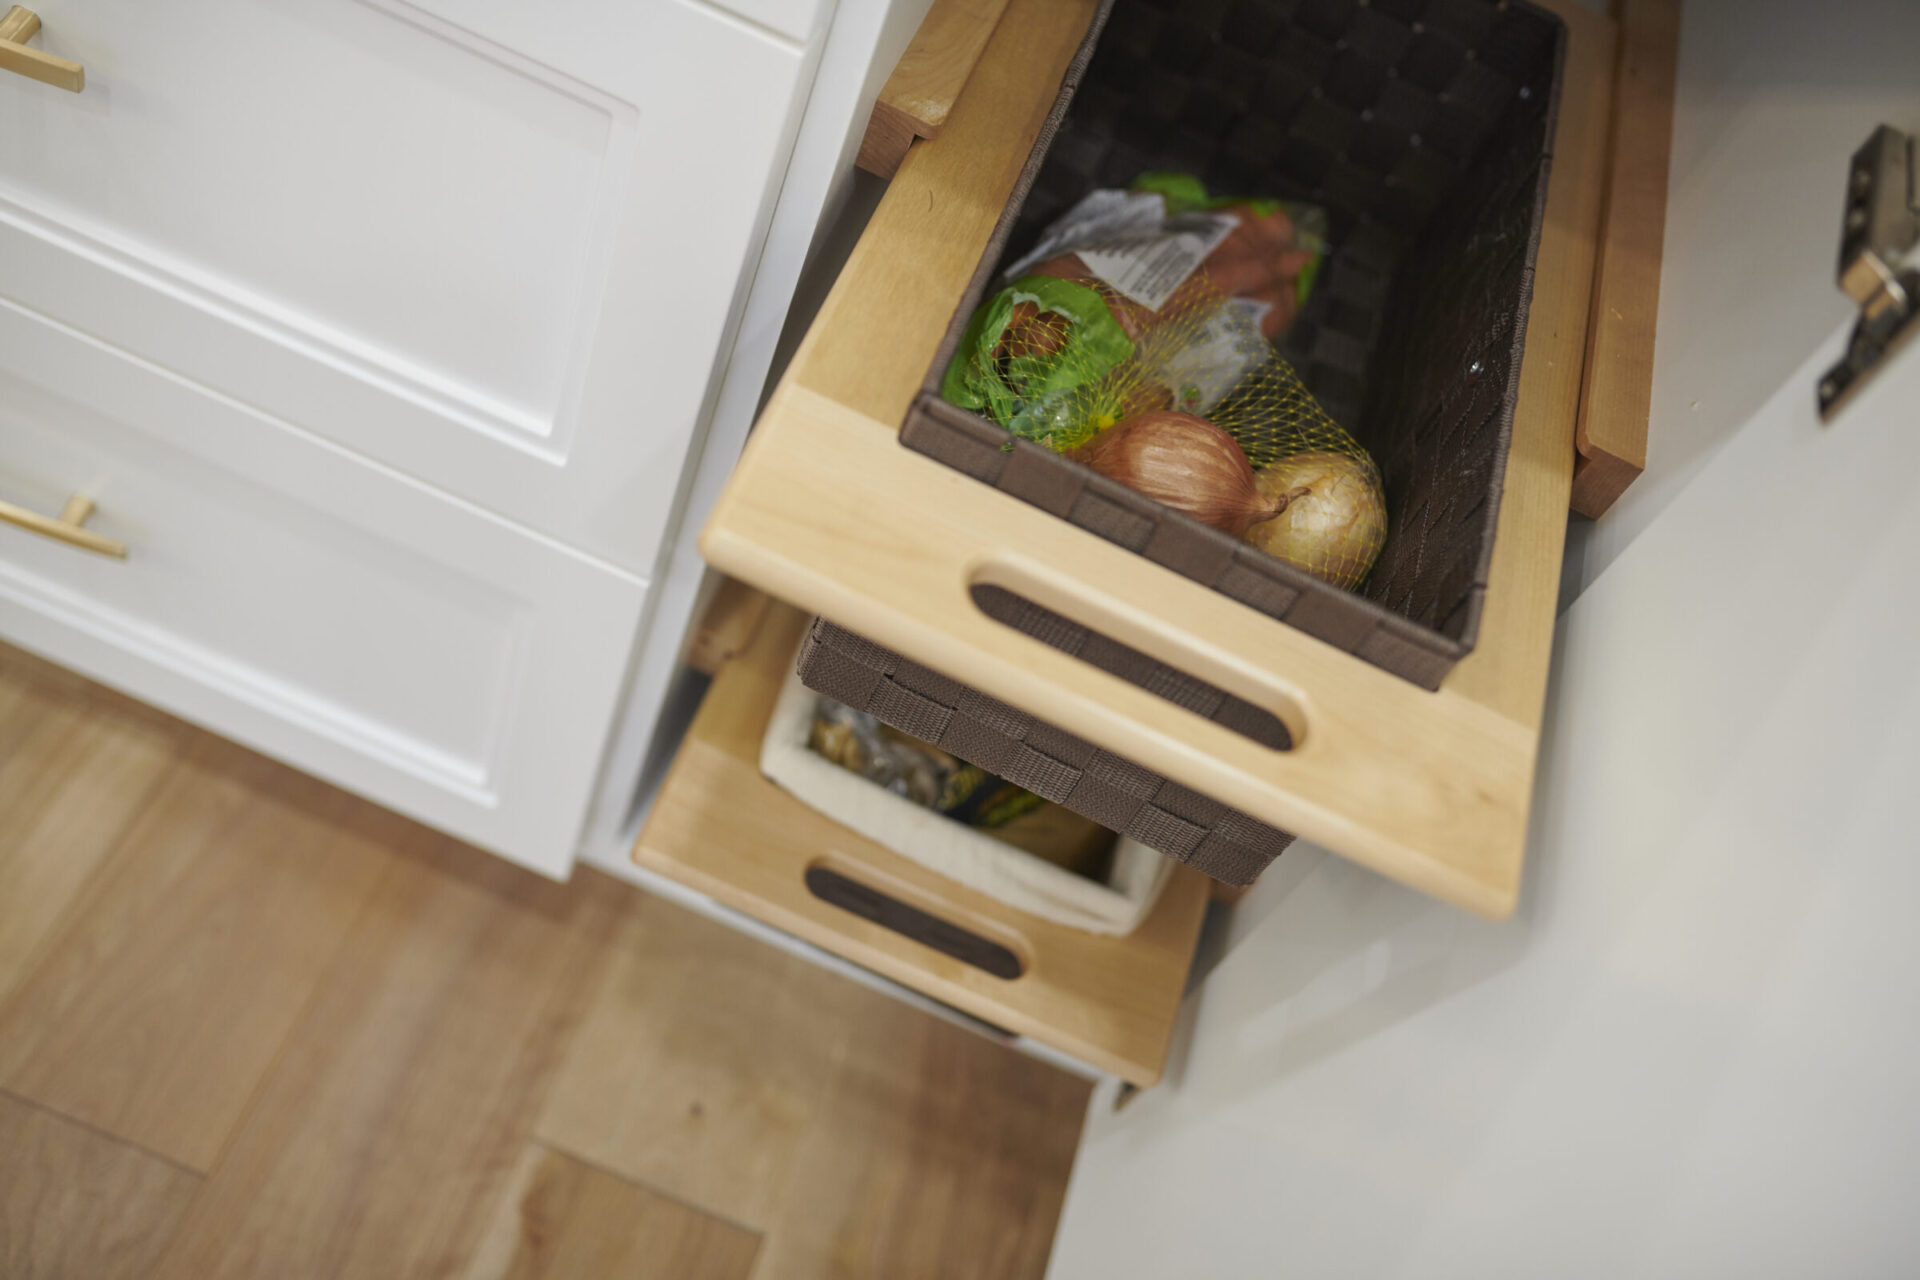 Two open wooden kitchen drawers with built-in baskets contain onions, potatoes, and a broccoli head. The modern design suggests an organized, clean space.